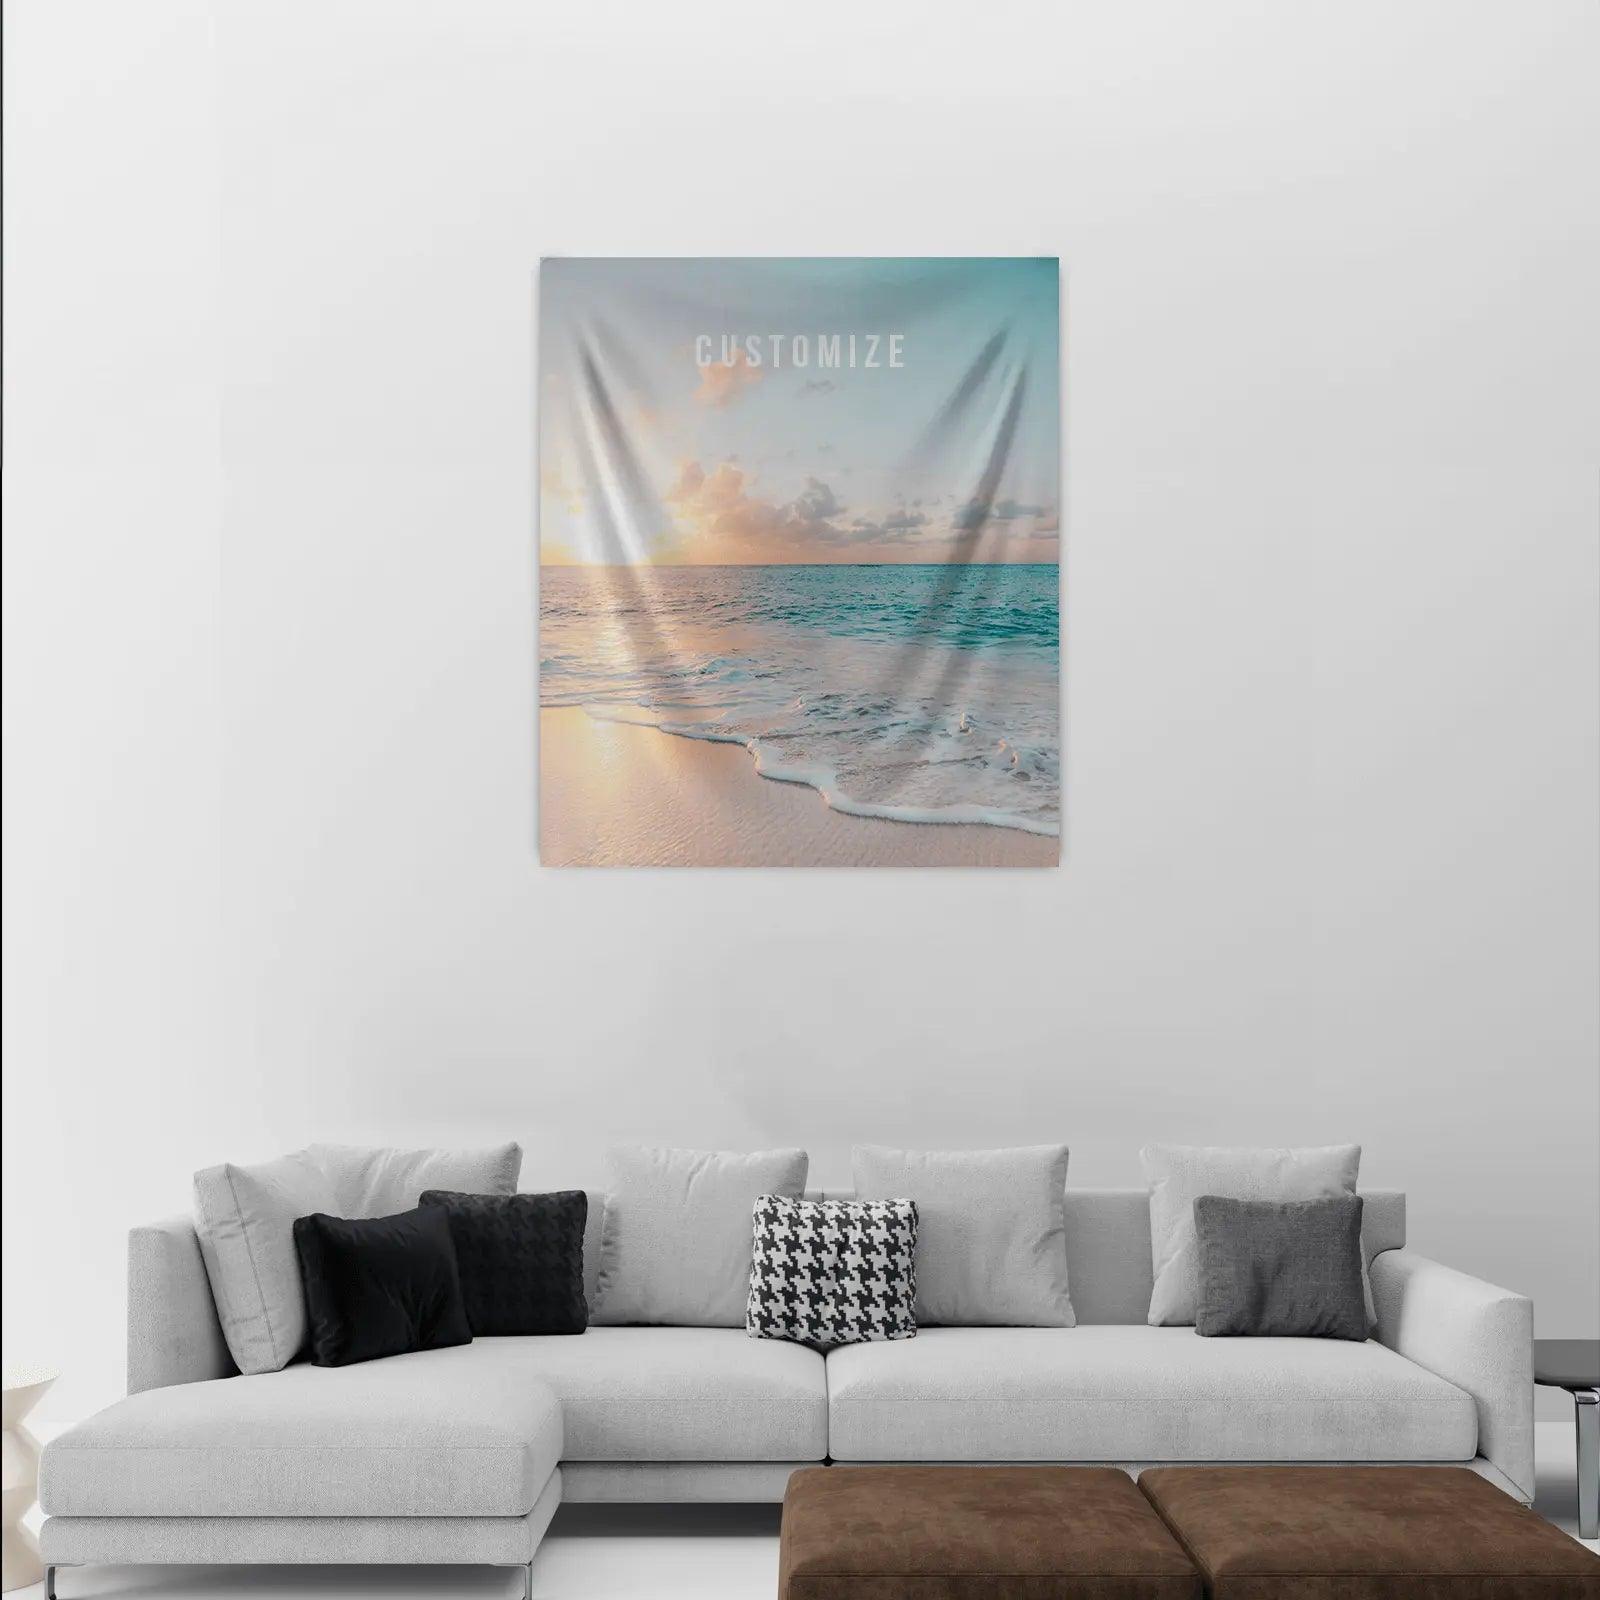 Wall Tapestry Tapestry 51-x-60-Vertical 44.95 Qstomize.com